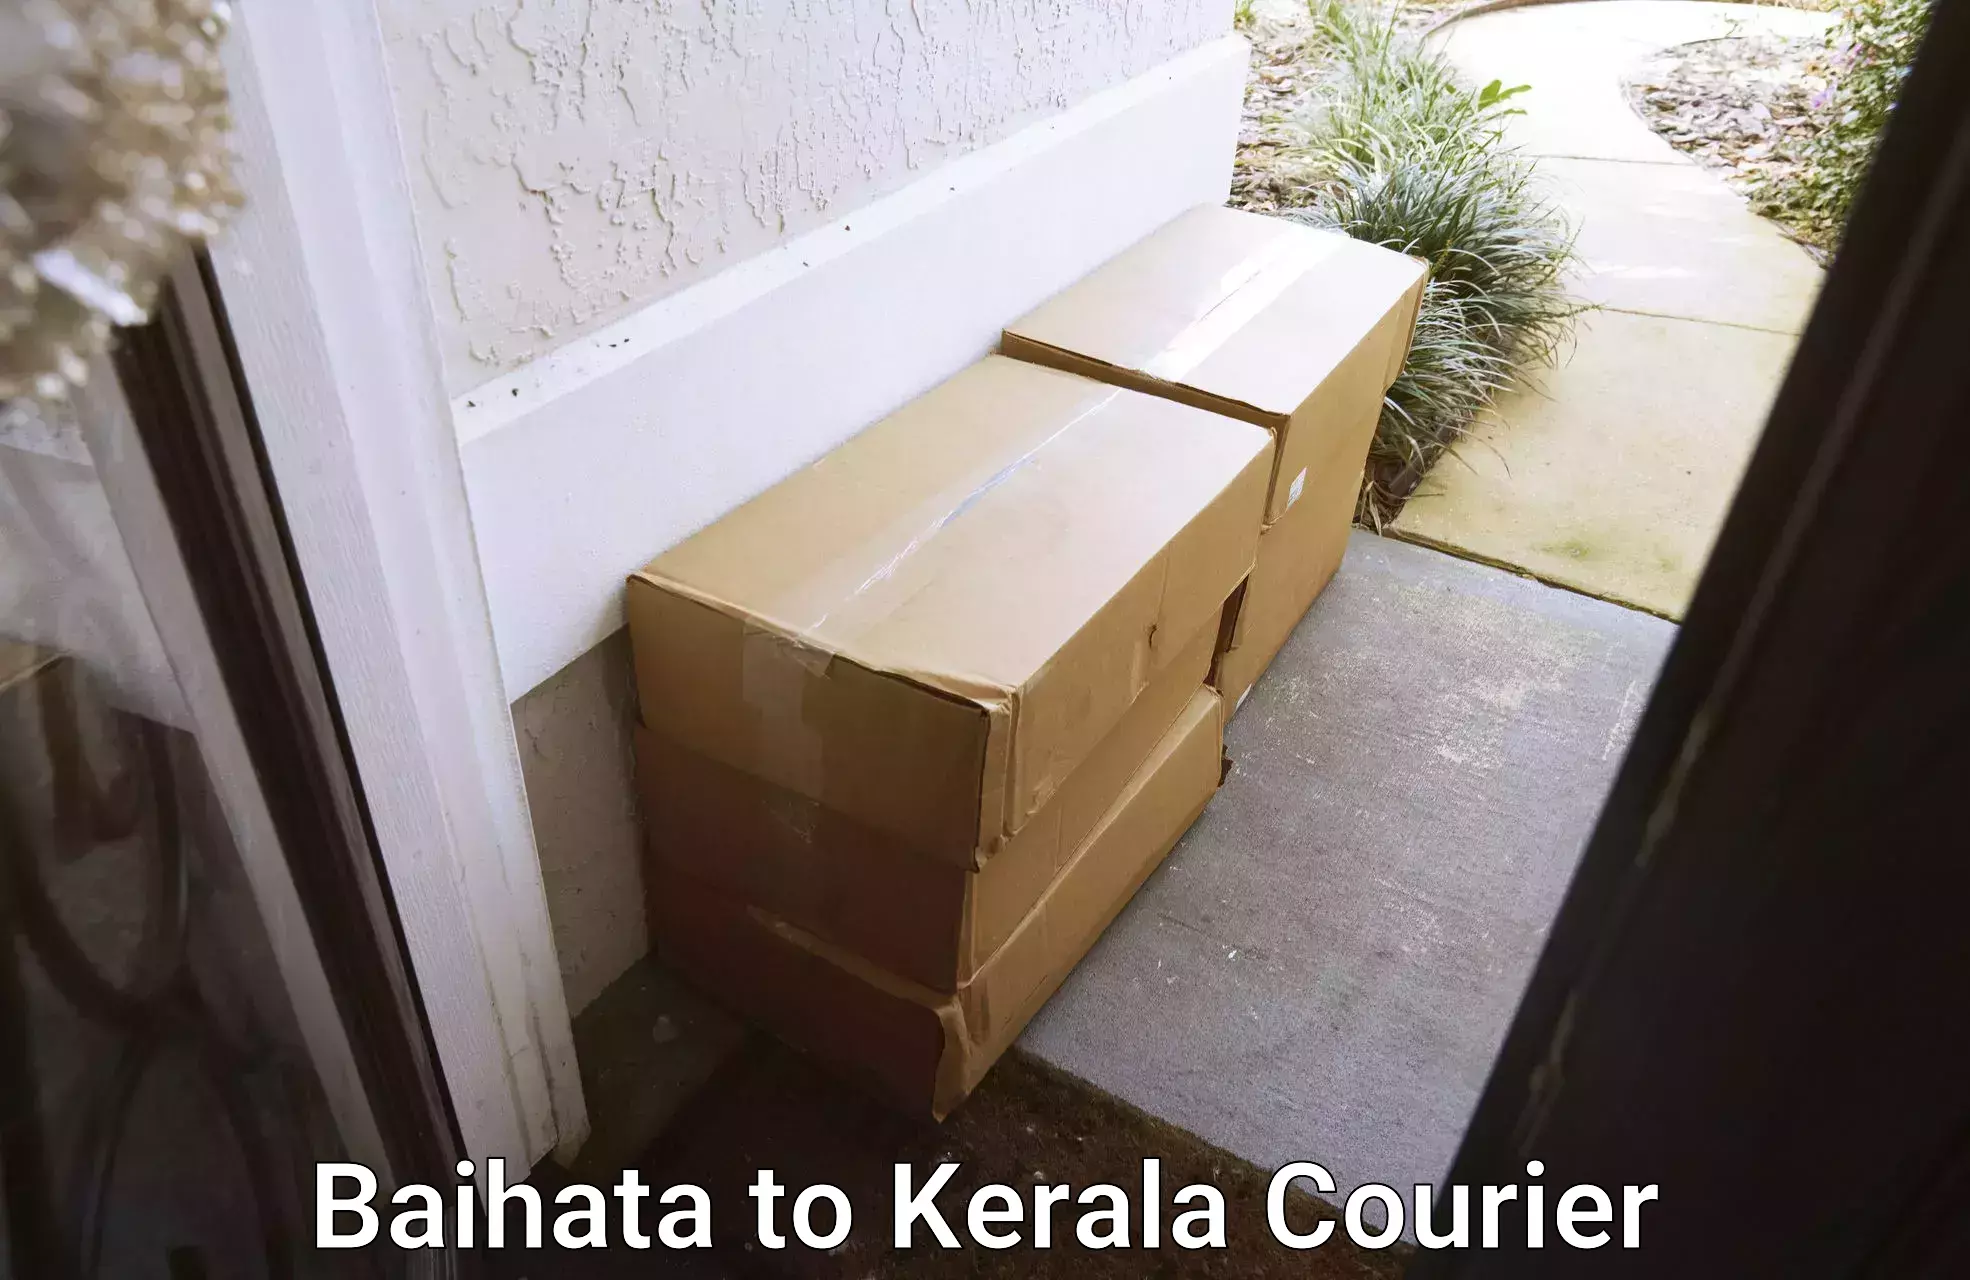 Nationwide parcel services Baihata to Kerala